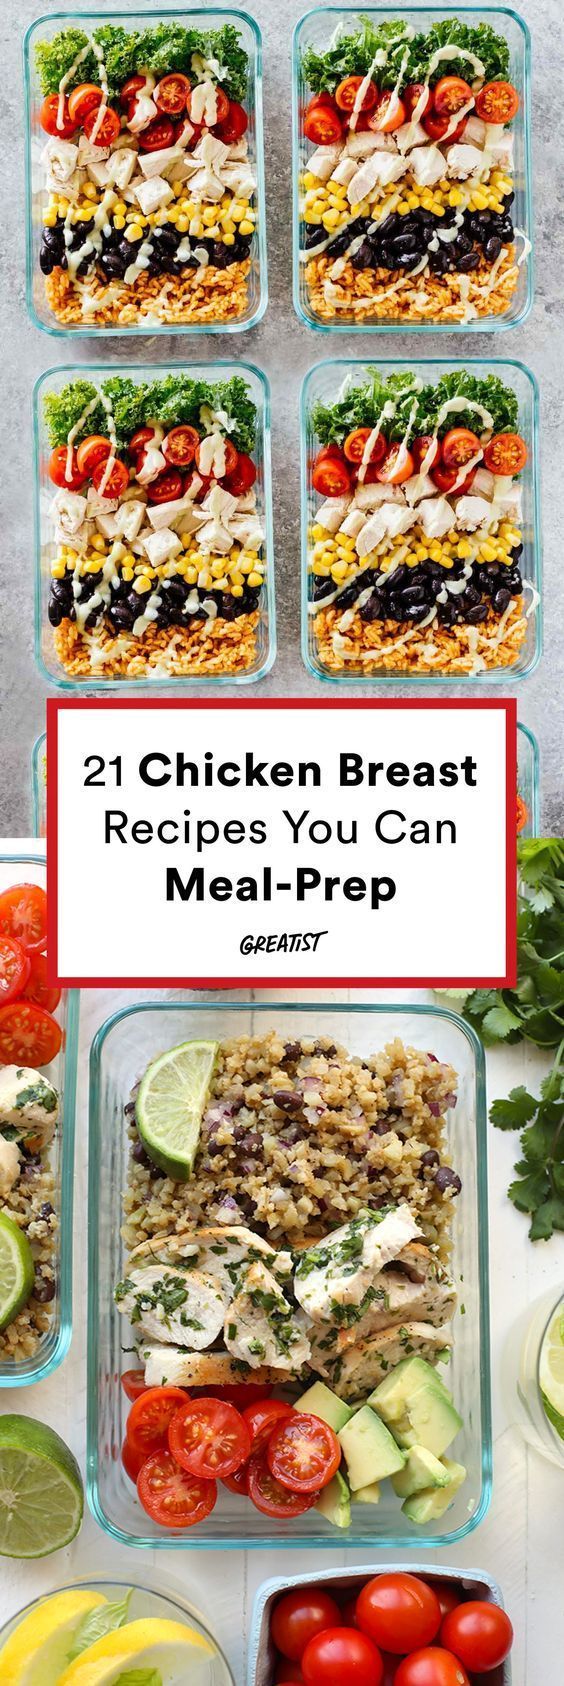 The Best Healthy Meal Prep Recipes, Clean Eating, For Breakfast, Lunch, Dinner, and For The Week